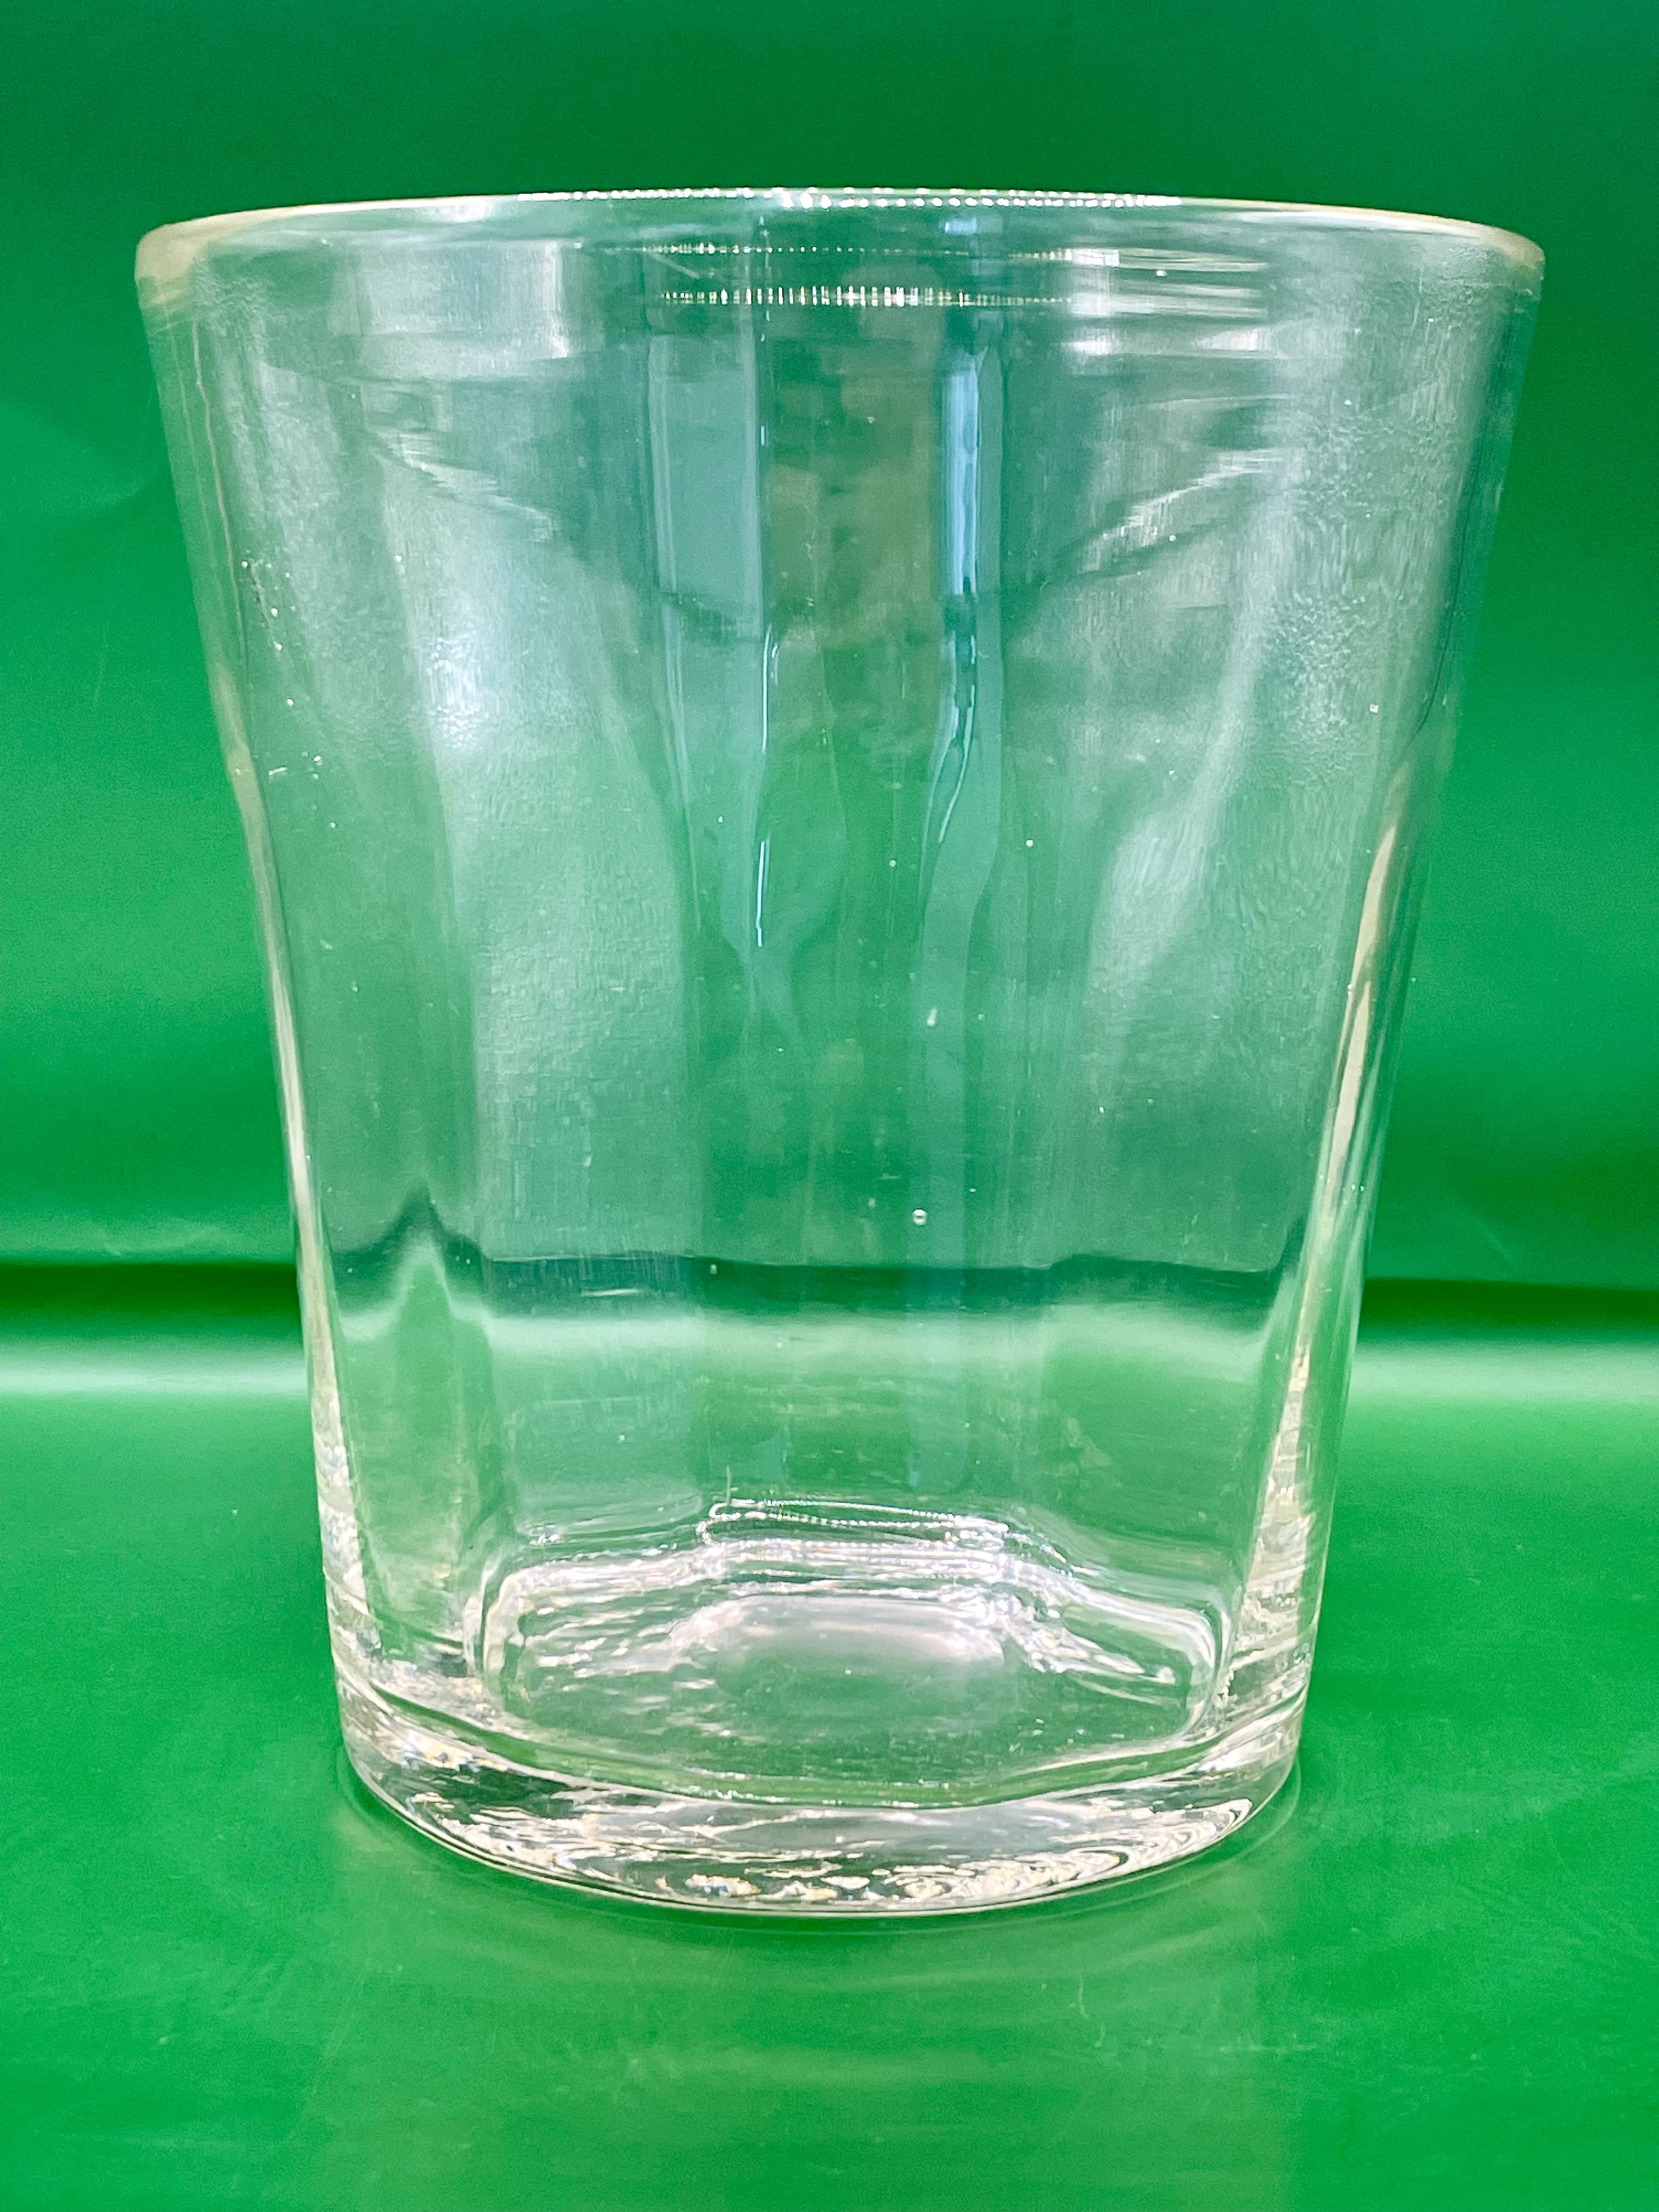 A large 1780s Georgian Glass Tumbler in very good condition.